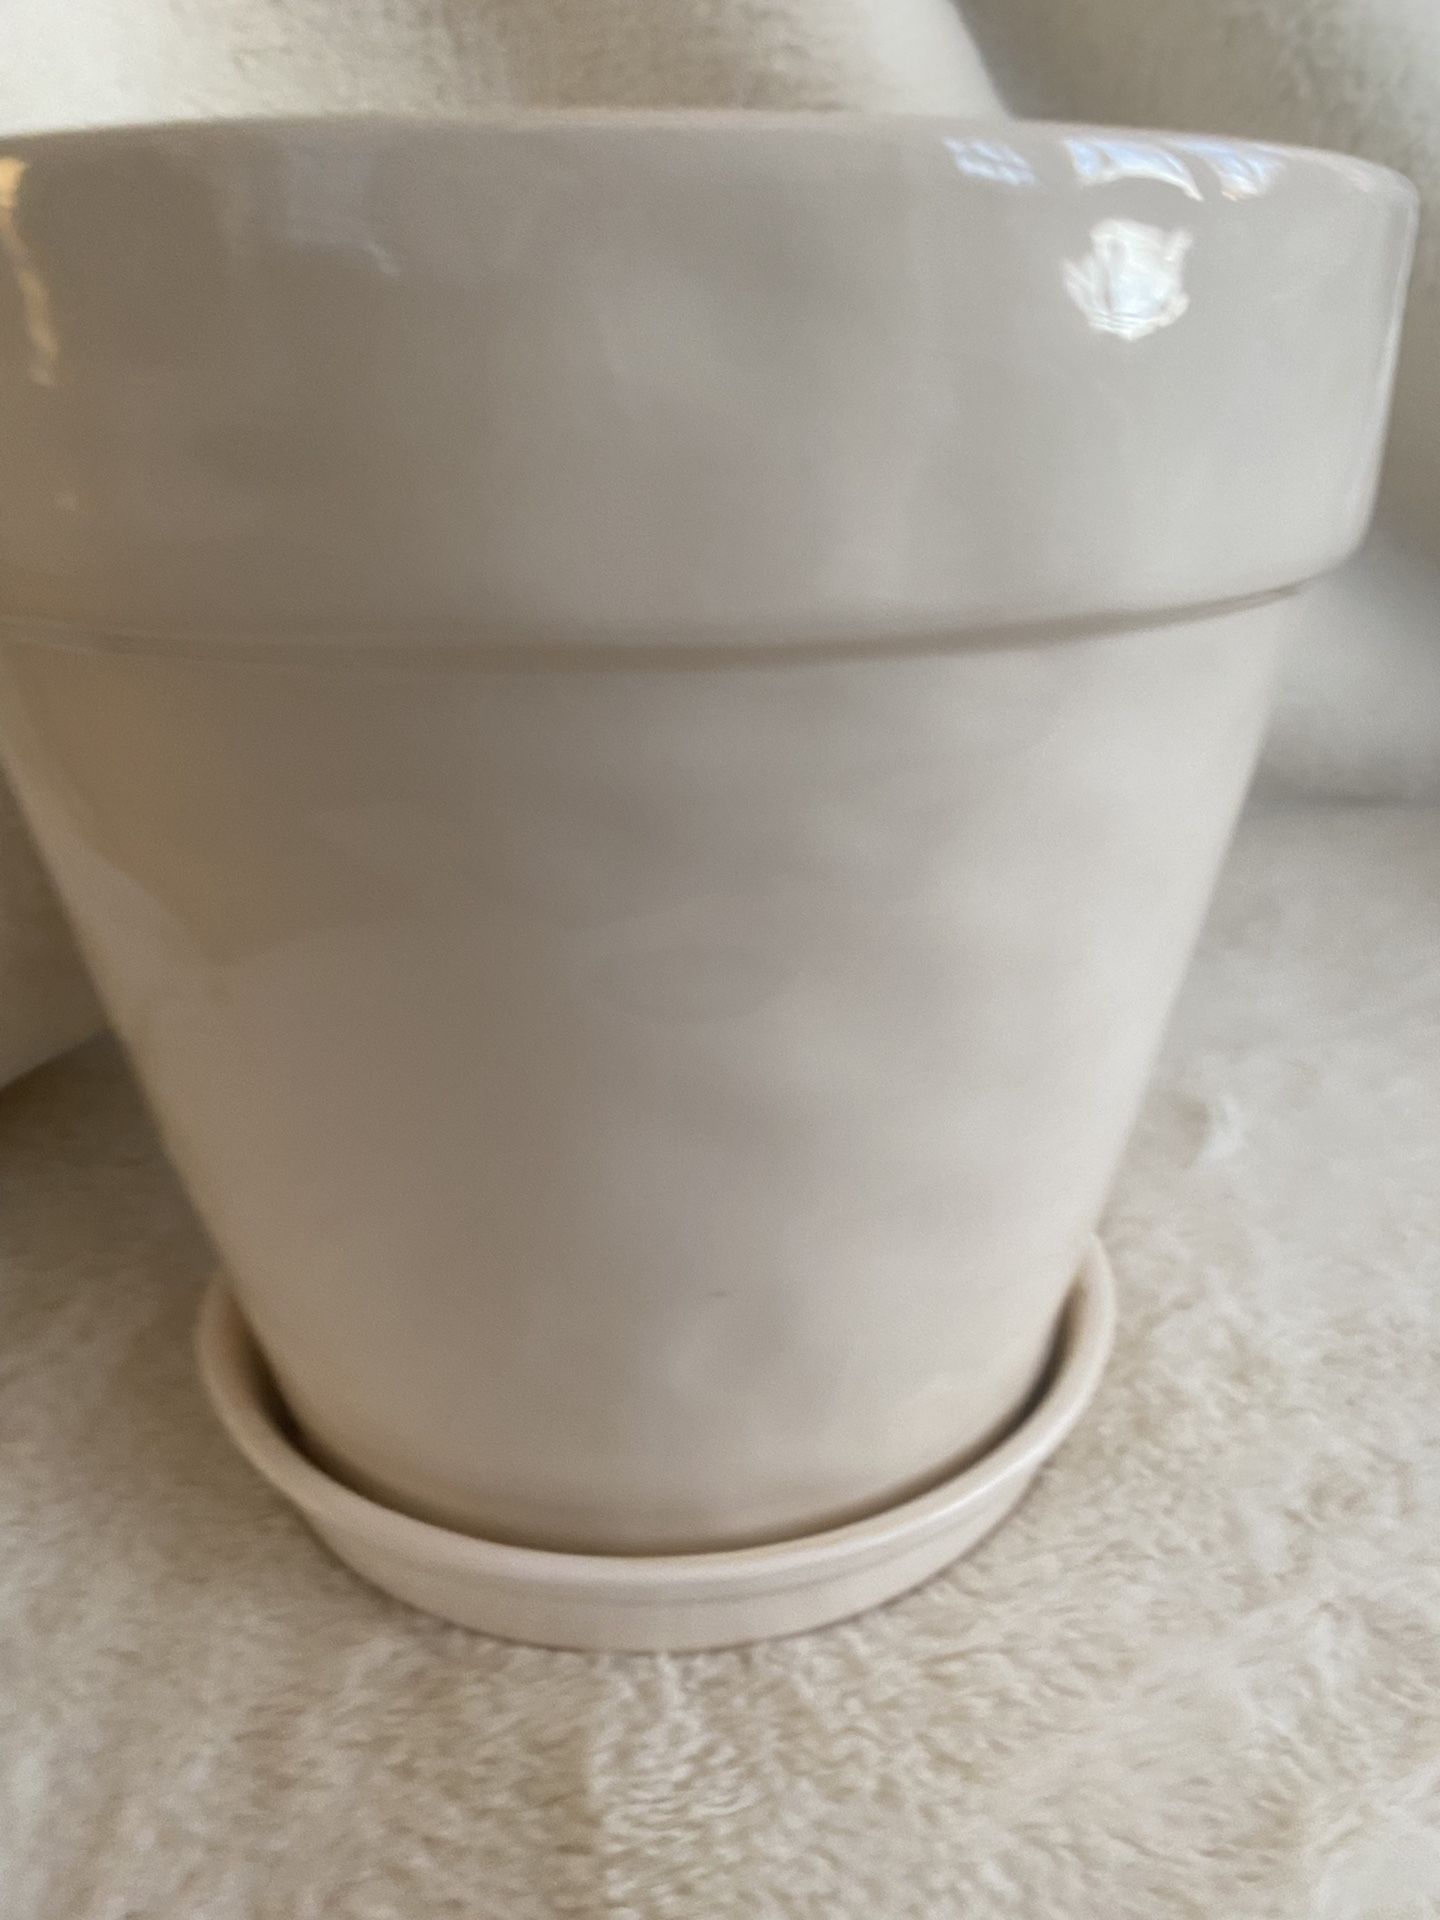 Rae Dunn BLOOM Large Ceramic Flower Pot Has drainage at bottom  No cracks, chips or defects on exterior Small hairline crack on inside bottom of pot -